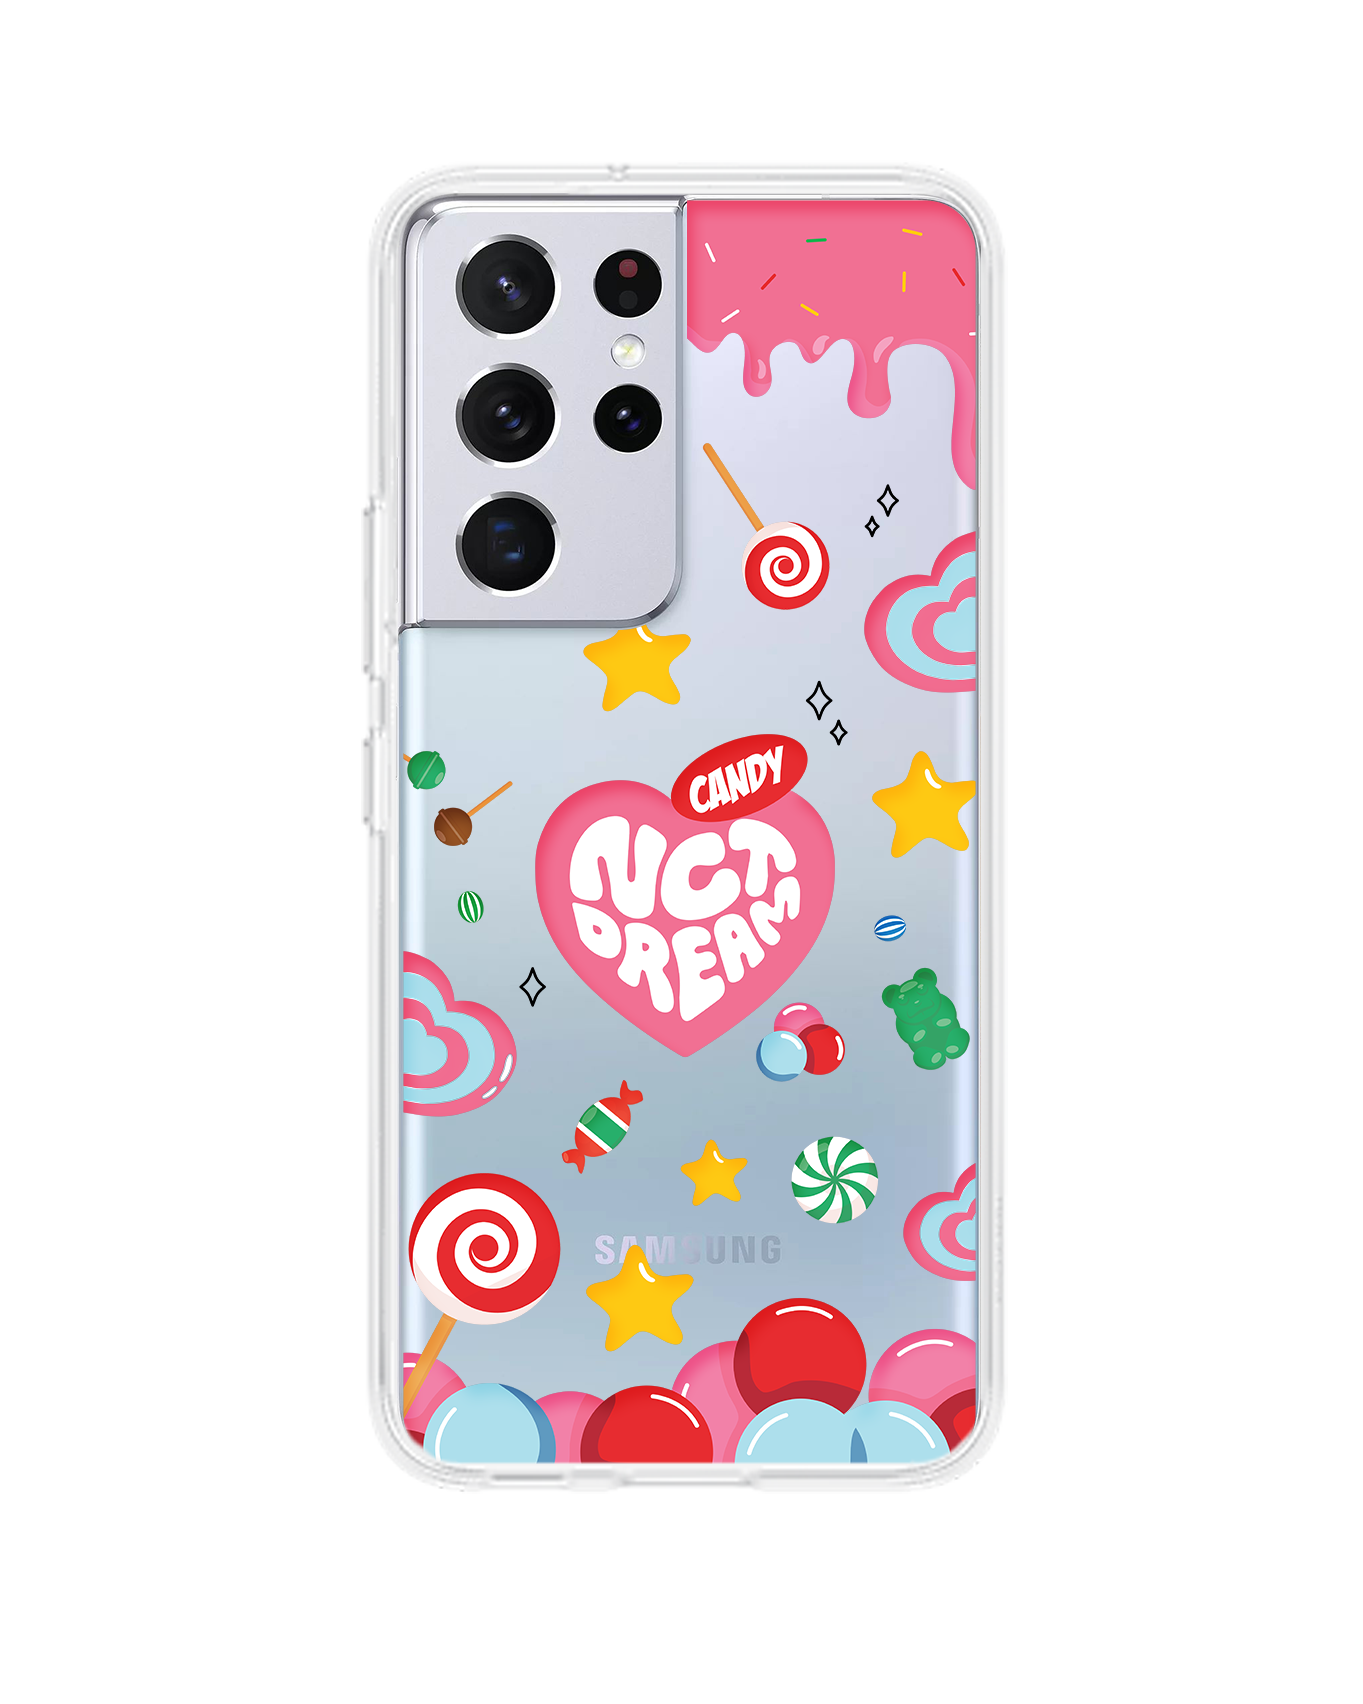 Android Rearguard Hybrid Case - NCT Dream Candy 1.0